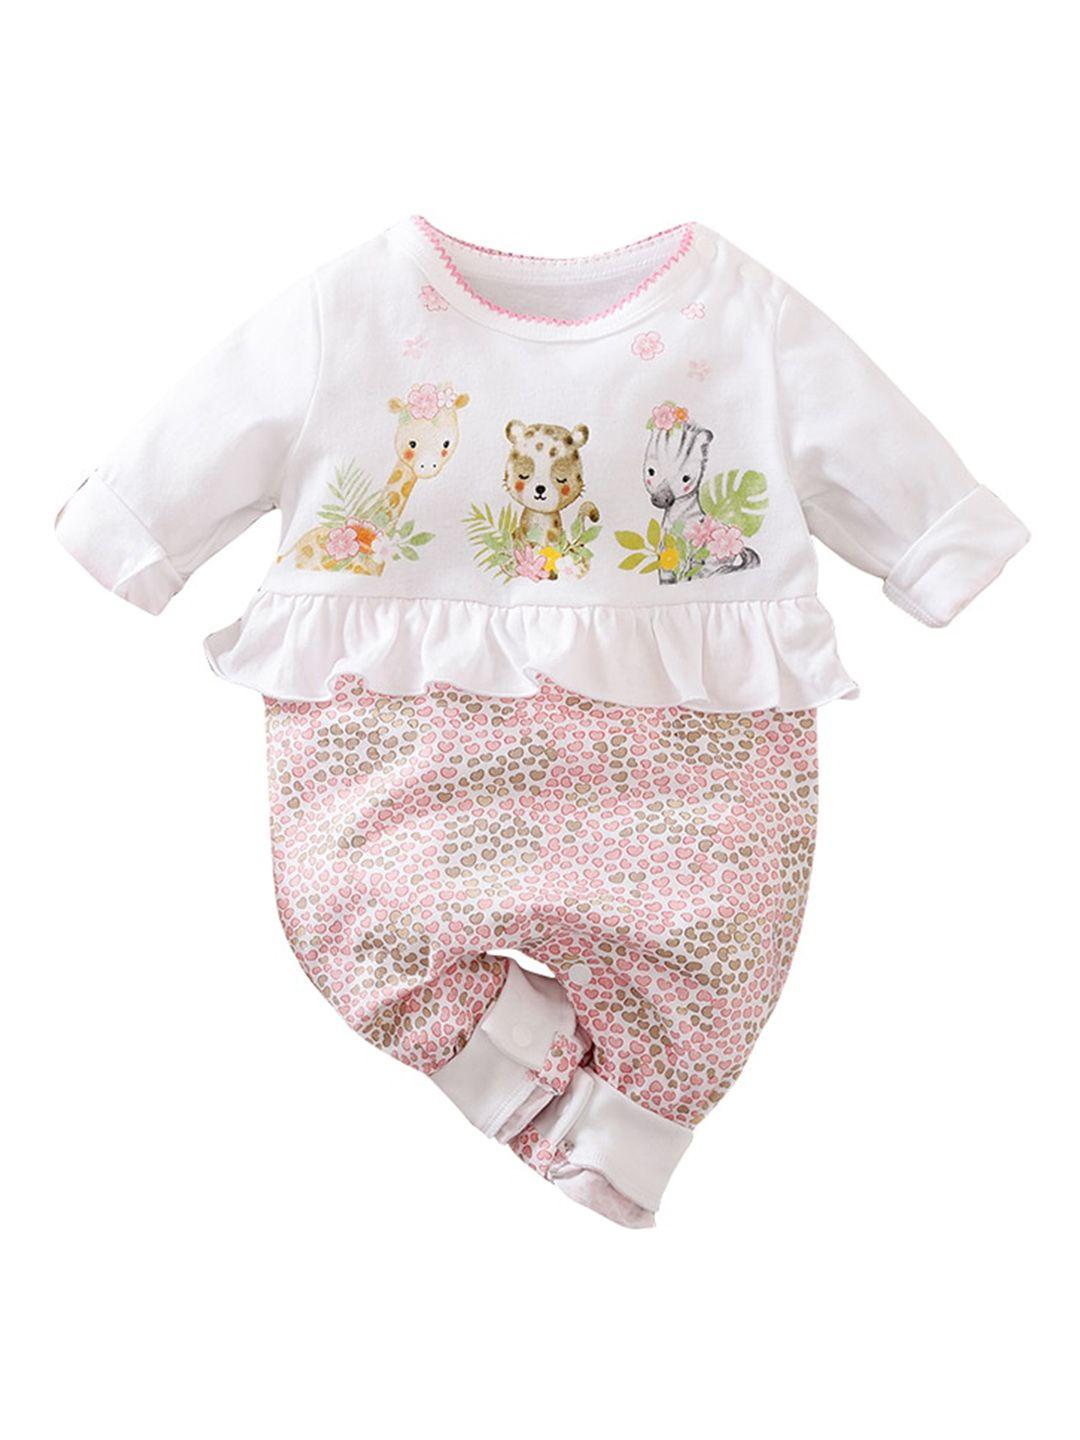 stylecast infant girls pink printed cotton romper